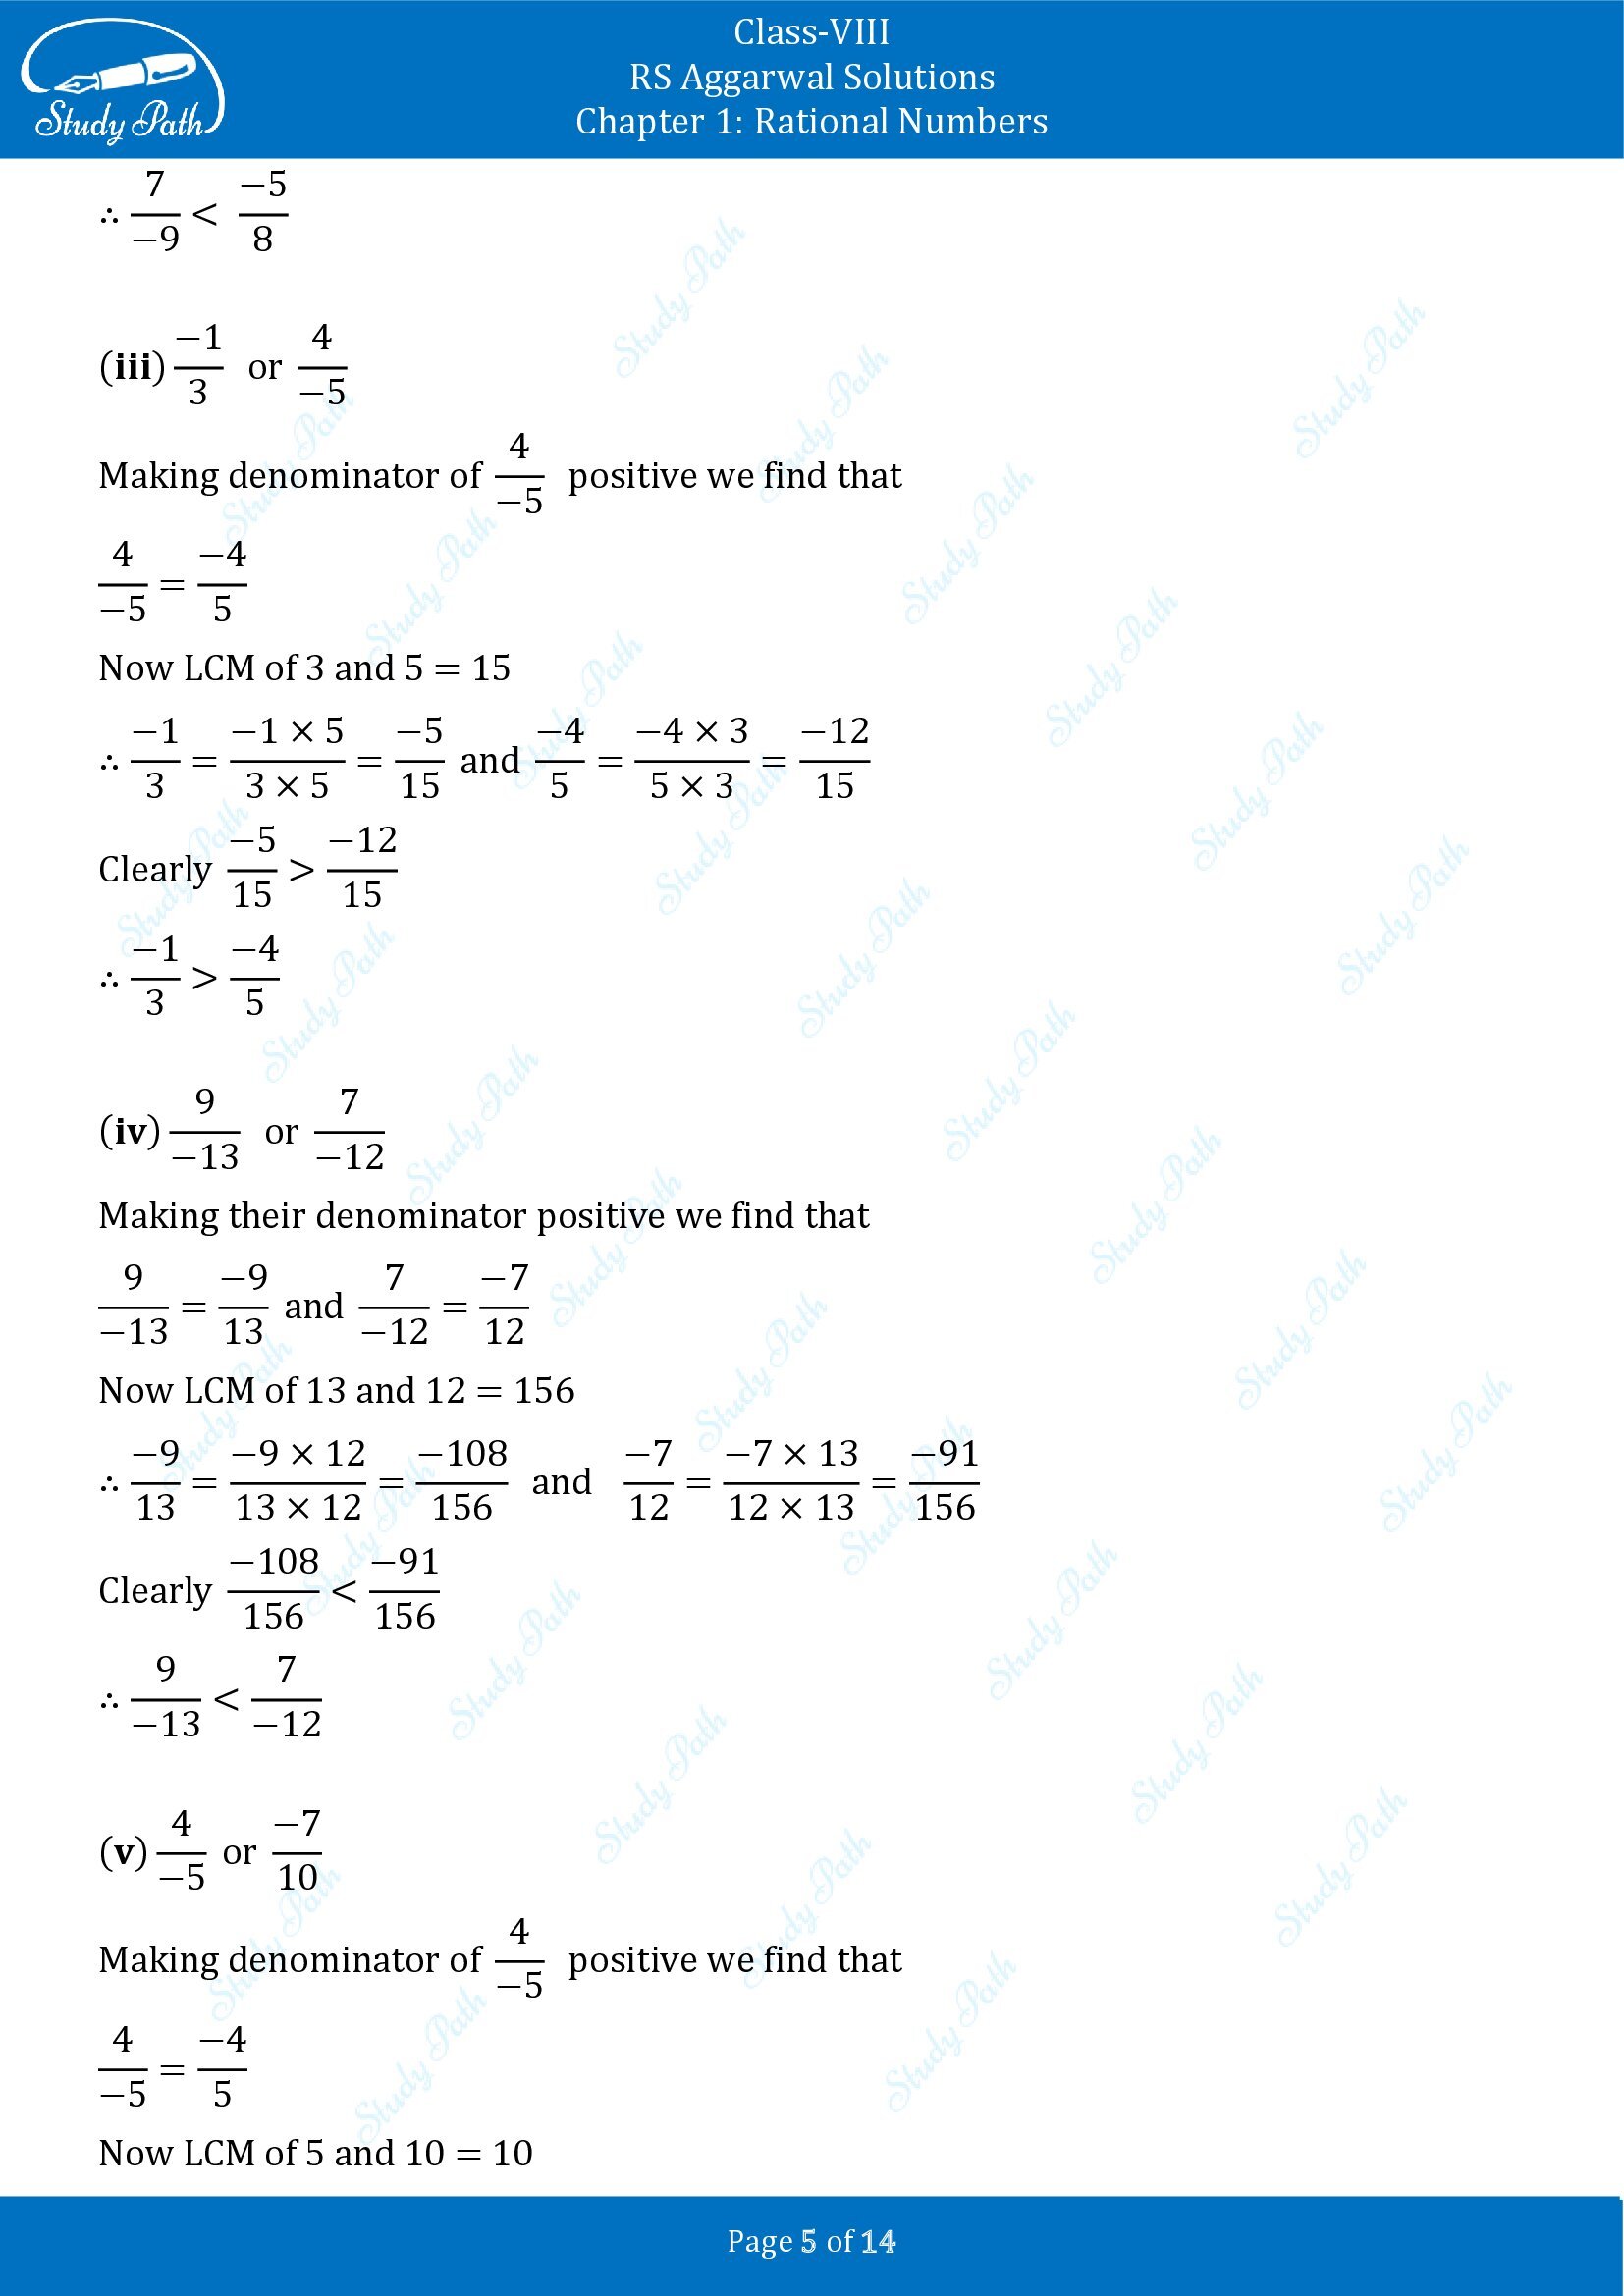 RS Aggarwal Solutions Class 8 Chapter 1 Rational Numbers Exercise 1A 00005